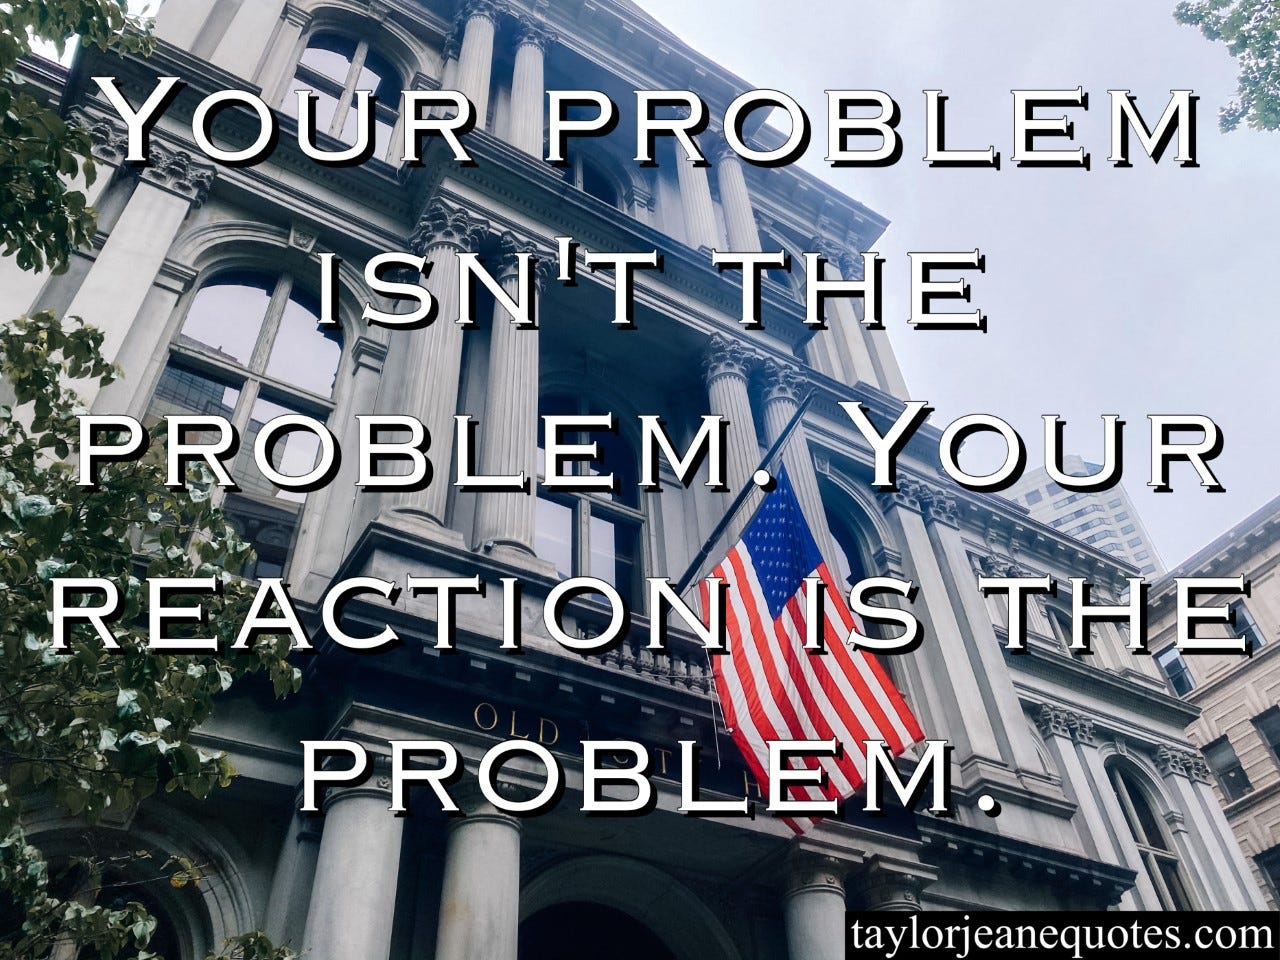 taylor jeane quotes, taylor jeane, taylor wilson, quote of the day, motivational quotes, inspirational quotes, positive quotes, quotes about problem solving, problem solving quotes, reaction quotes, mindset quotes, life qutoes, how to stay positive, life quotes, life lesson quotes, disagreement quotes